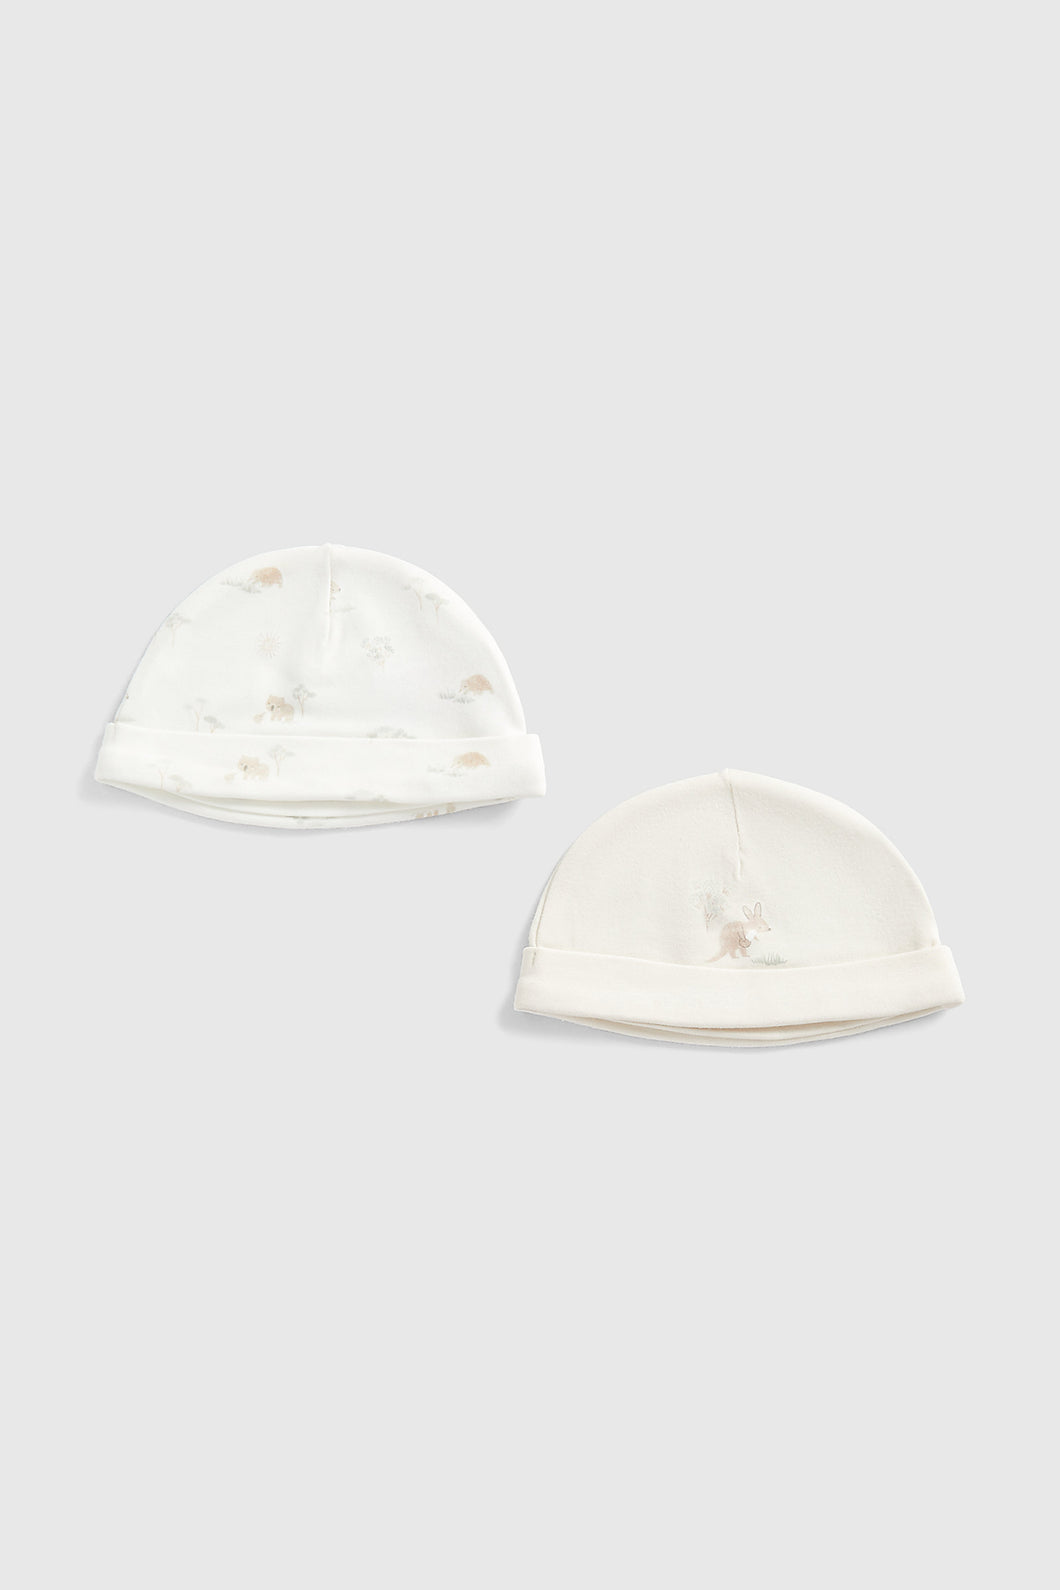 Mothercare My First Kangaroo Hats - 2 Pack